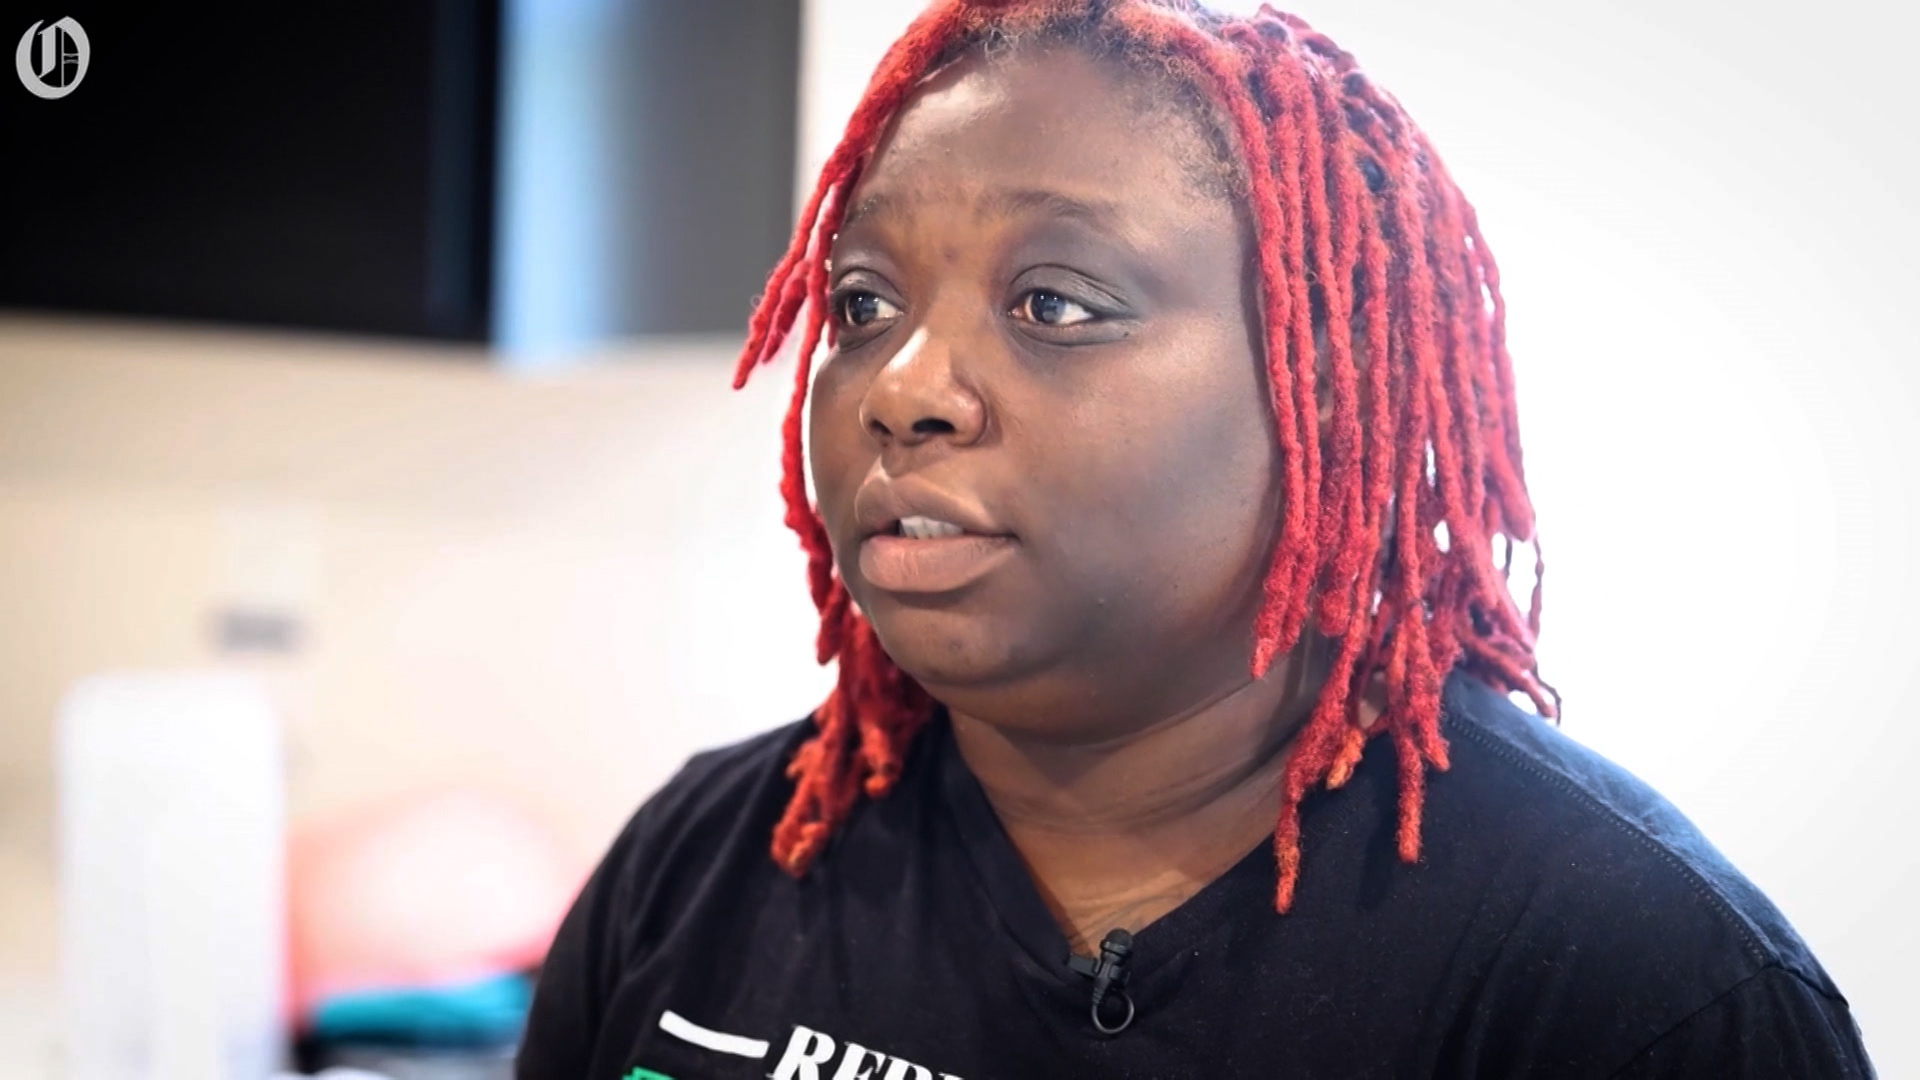 This is an image of a woman with red dreadlocks who is explaining the necessity of security.